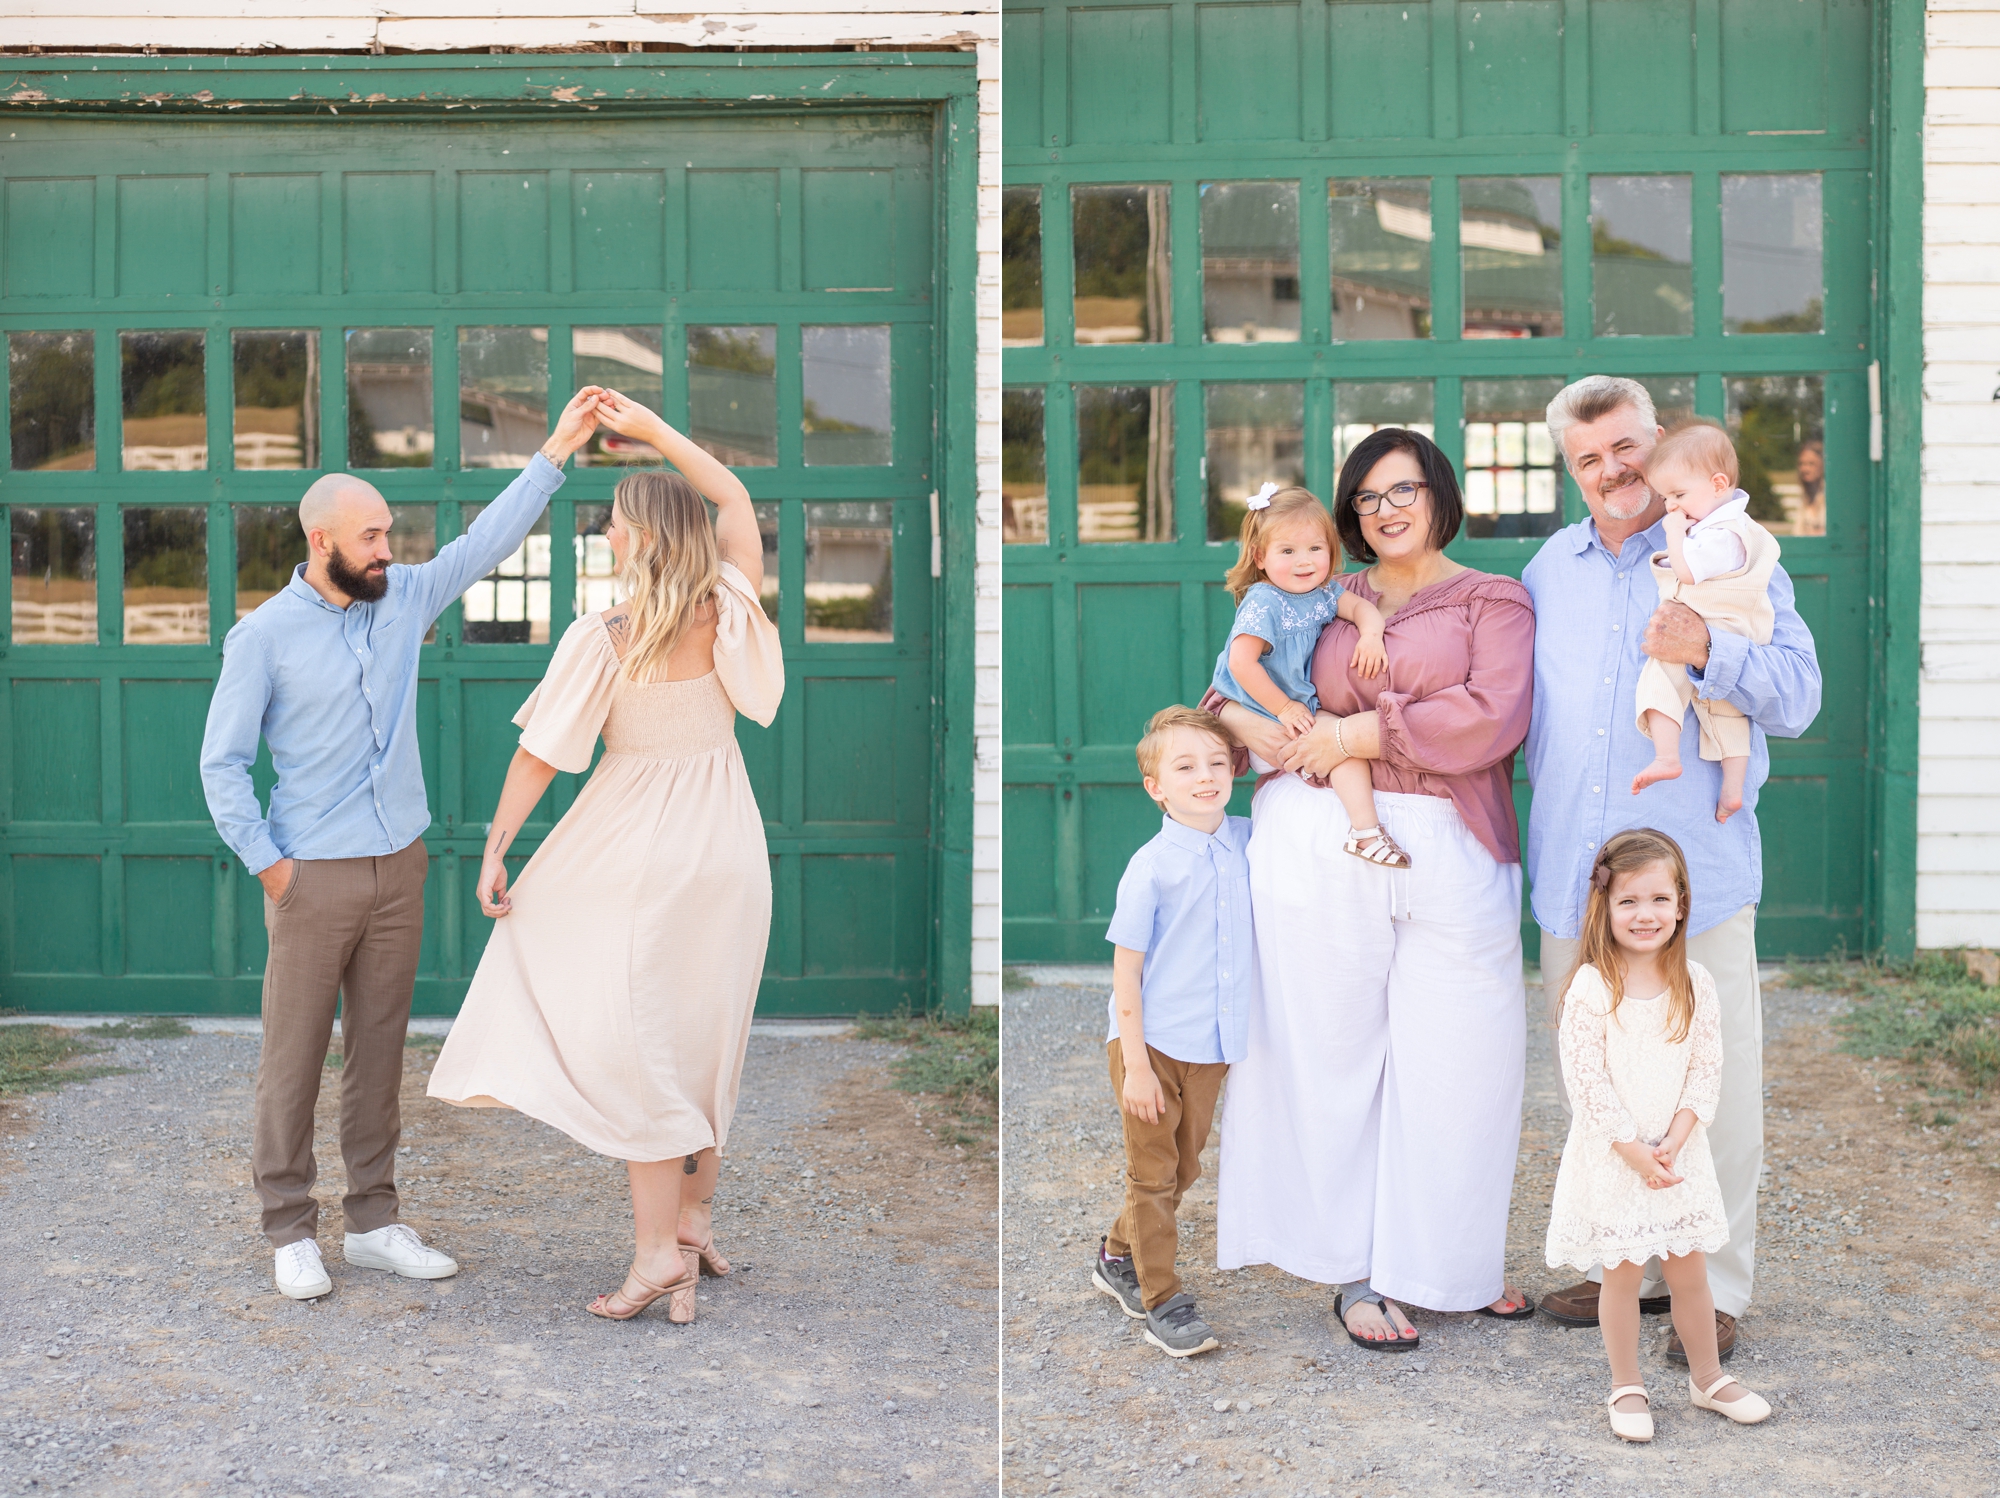 The Bishops' extended family session is live on the blog now! I loved hanging out with this sweet family for a little while and capturing them all together! This session is featured on my monthly membership, Behind the Lens! Go along with me on this session and see how I shoot it from the settings I chose to how I posed them! Click to learn more! 